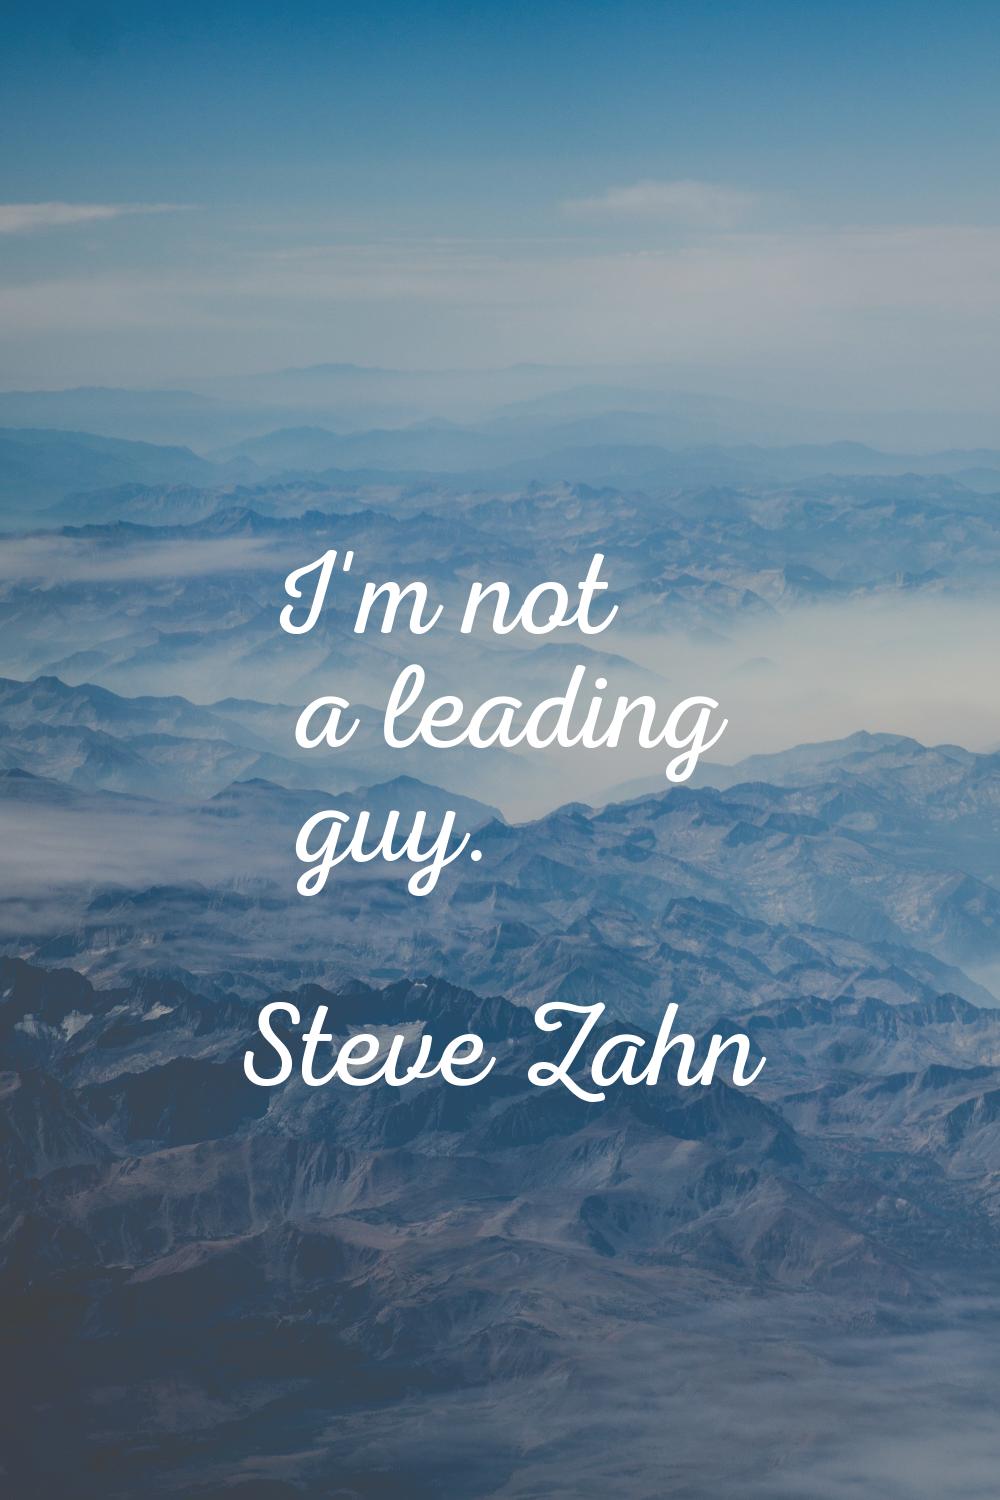 I'm not a leading guy.